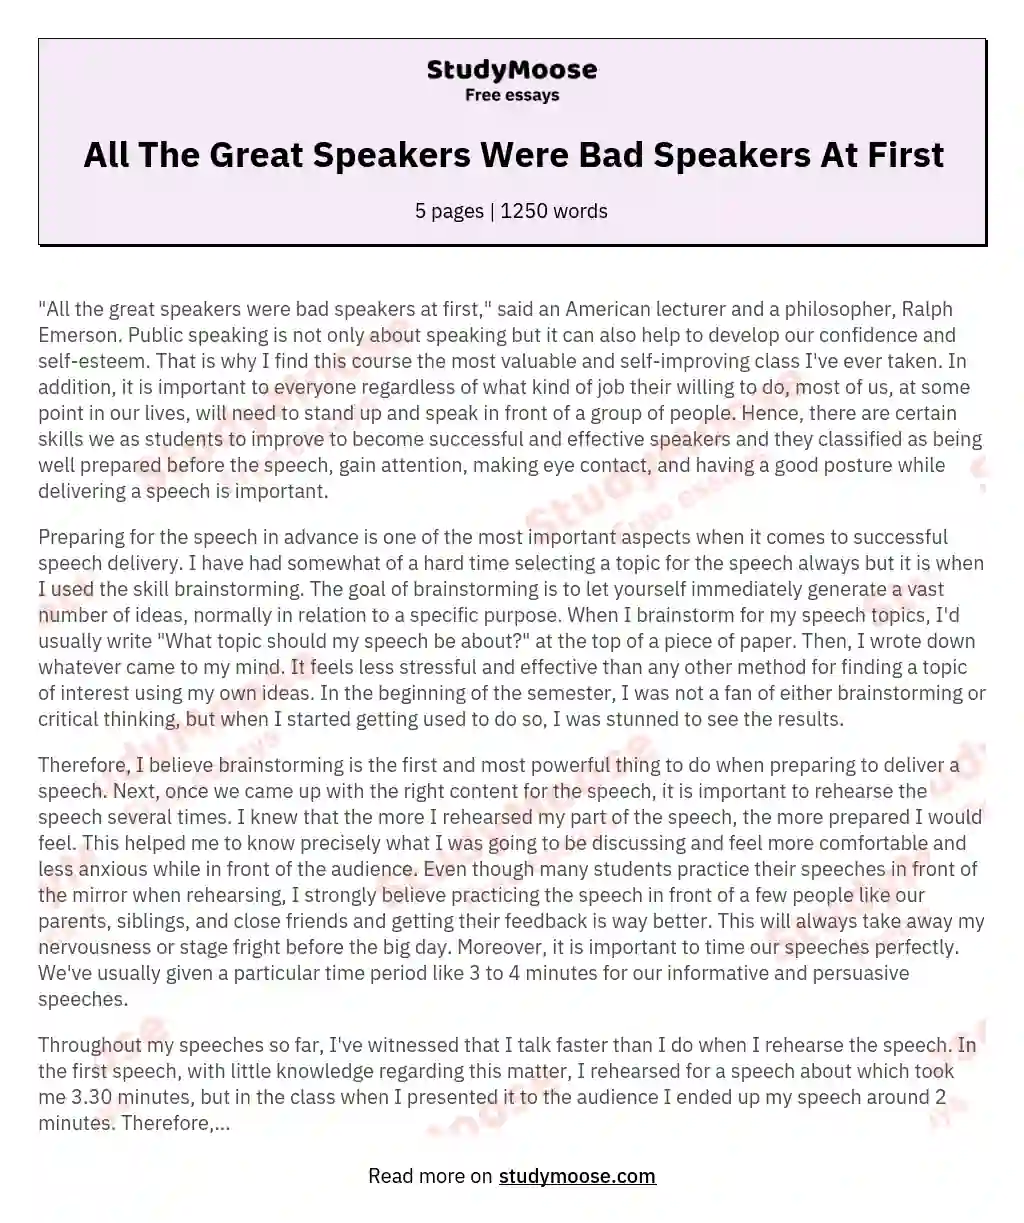 All The Great Speakers Were Bad Speakers At First essay